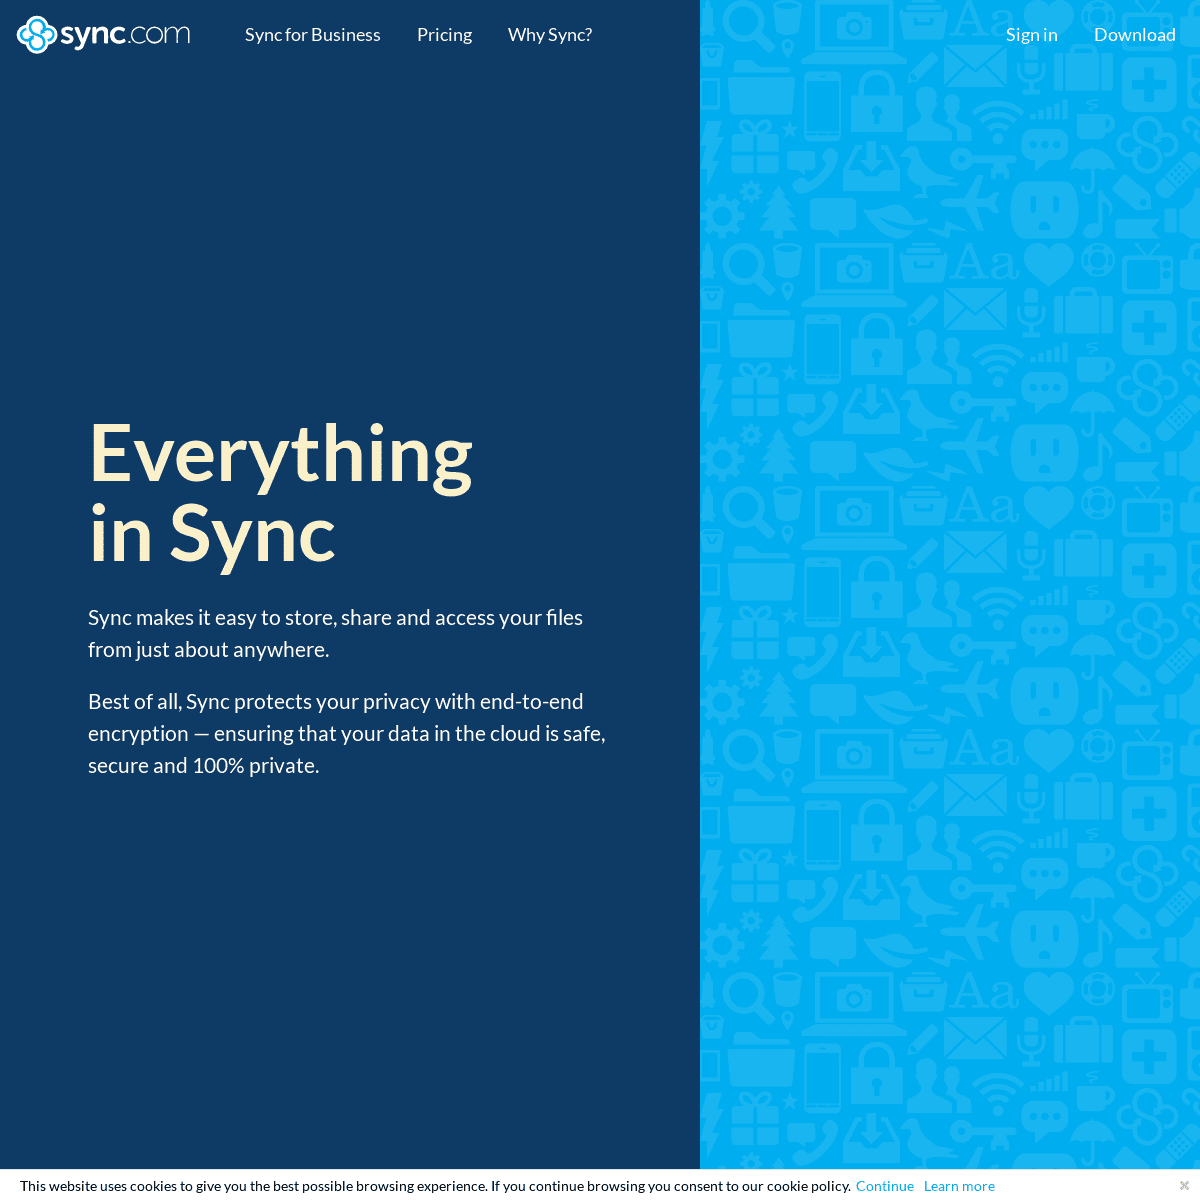 A complete backup of https://sync.com